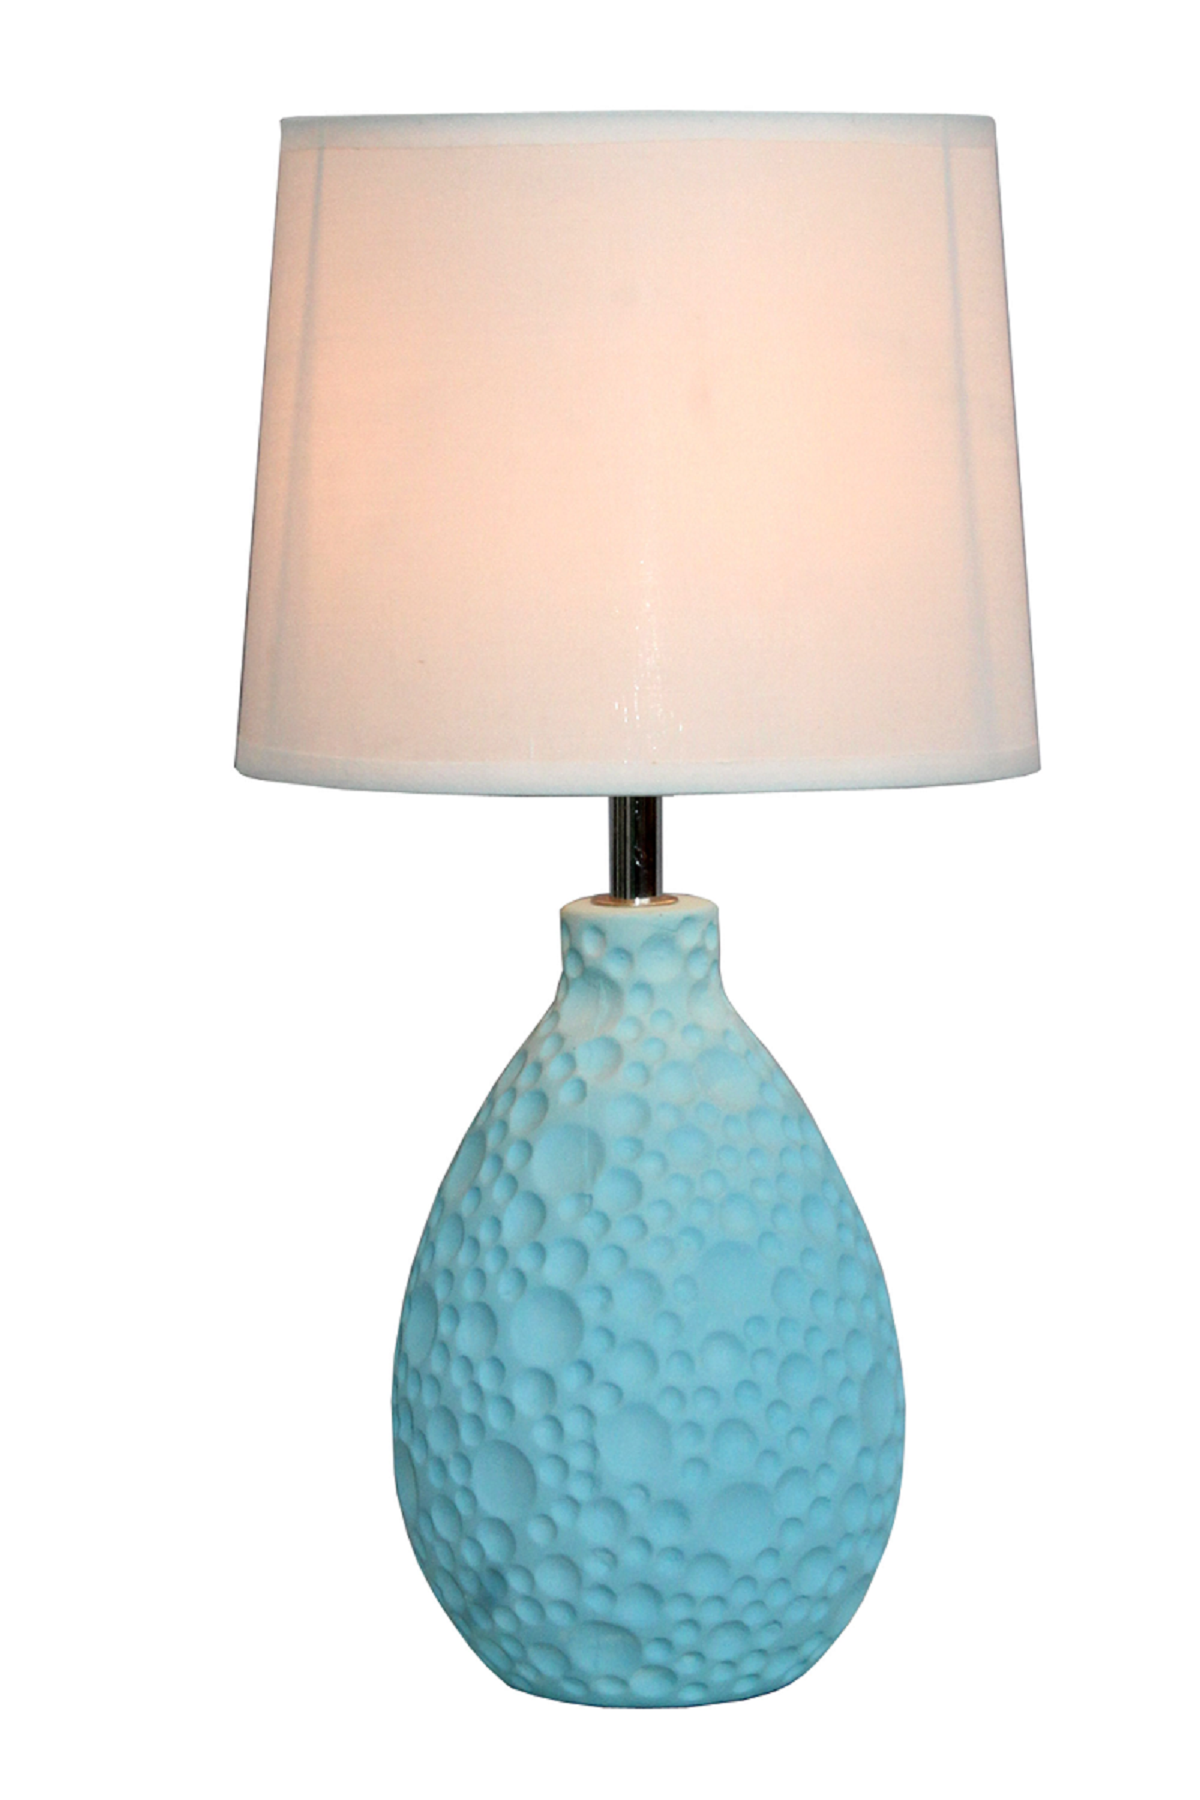 Simple Designs Blue Texturized Ceramic Oval Table Lamp